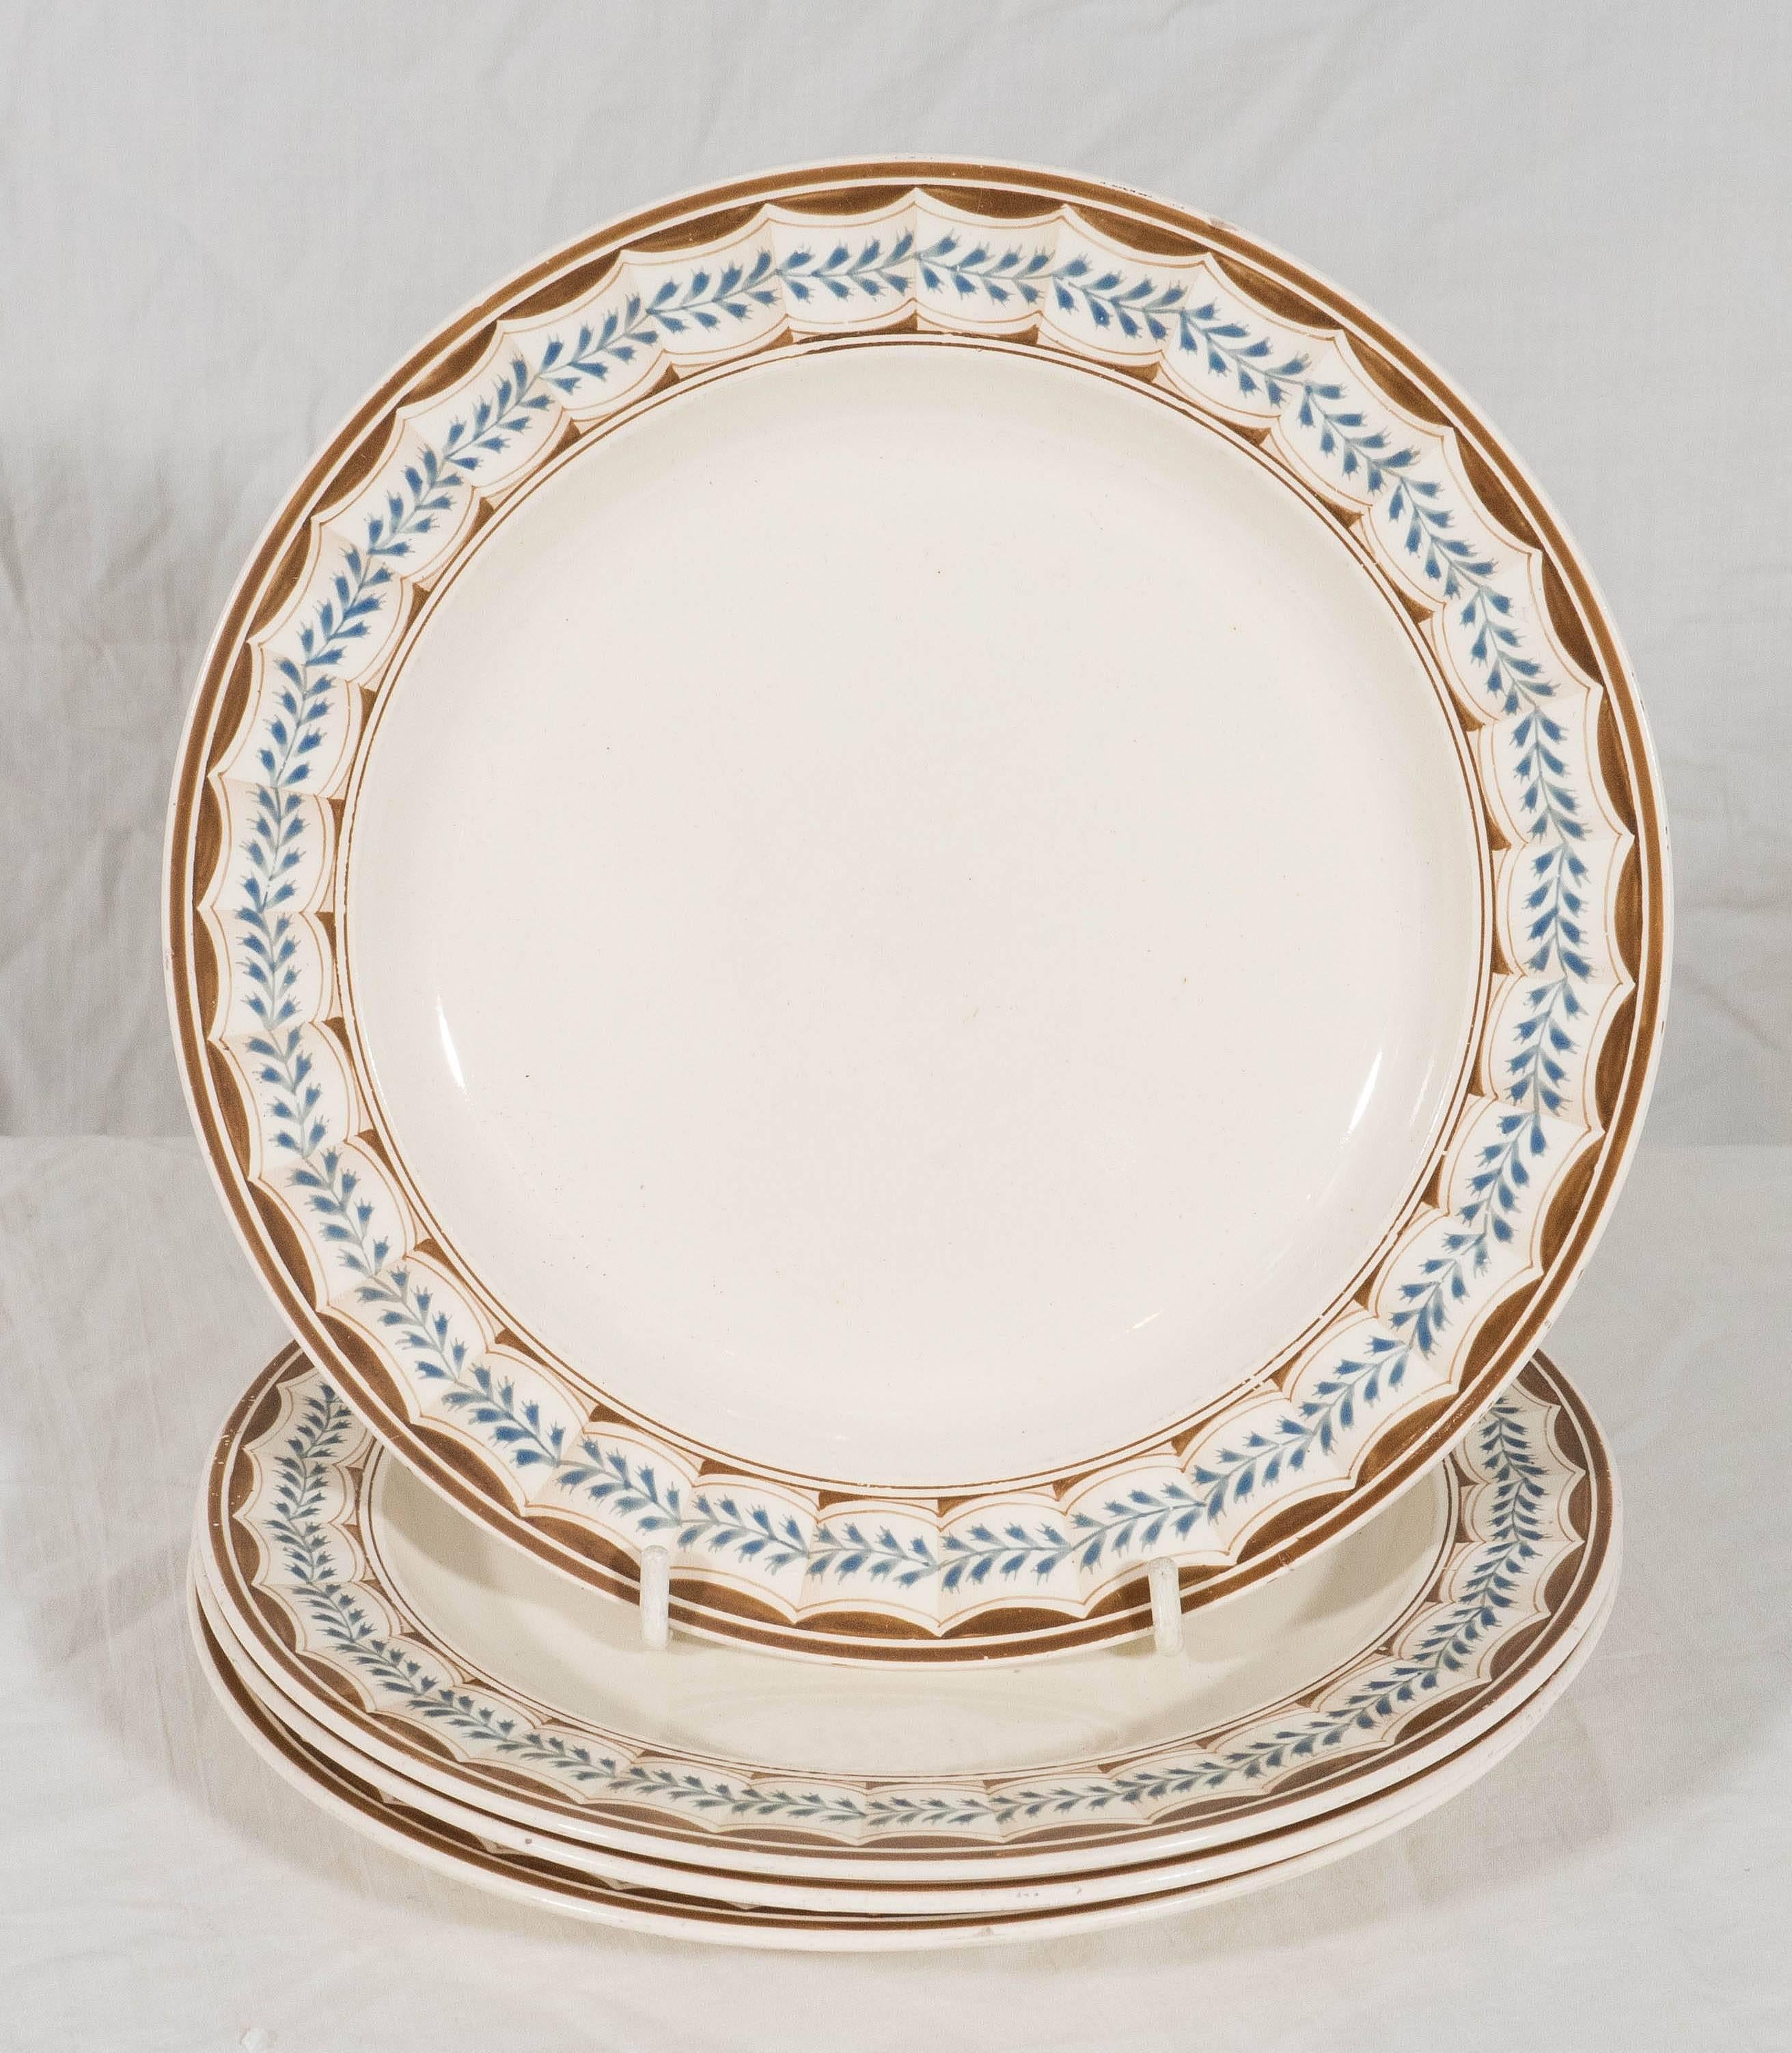 Four Wedgwood Creamware Dishes in the Lag and Feather Pattern 1